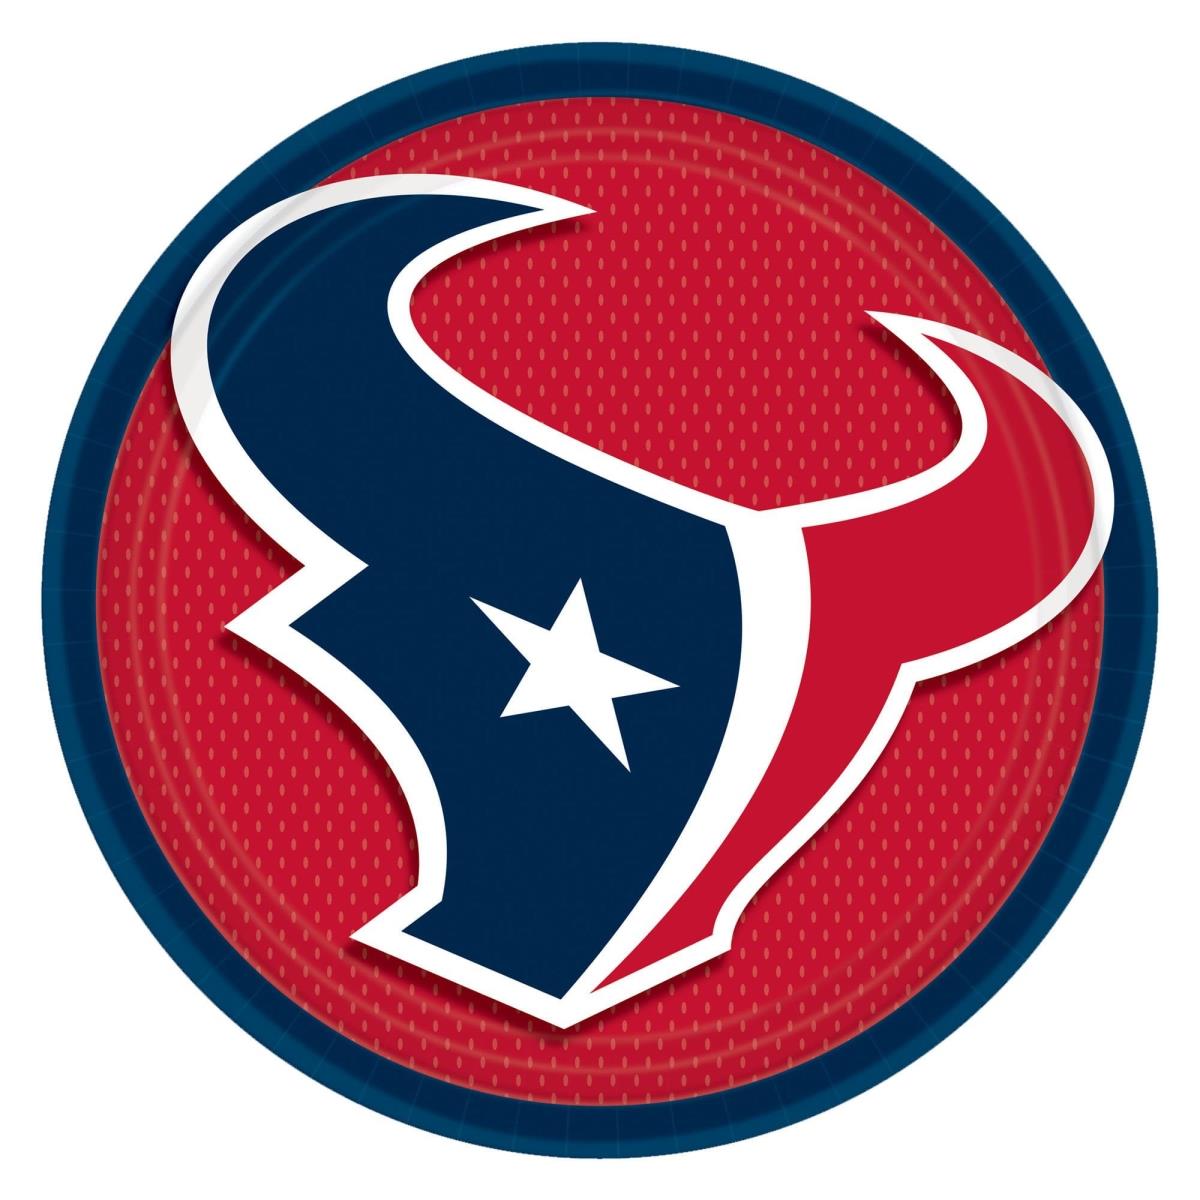 Picture of Amscan 636414 Houston Texans Lunch Plate - 8 Piece